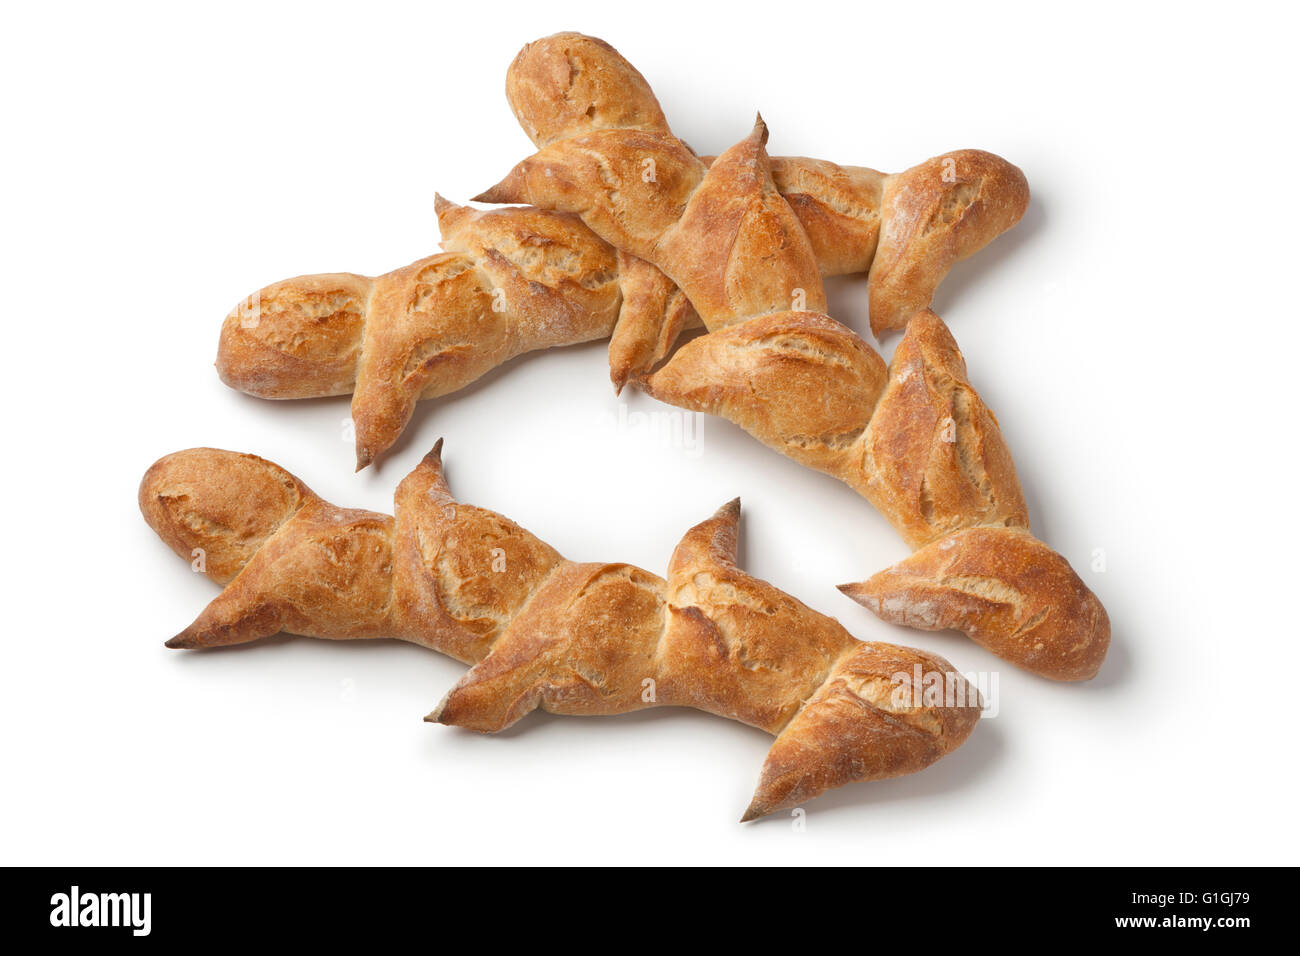 Two French pain d'epi or wheat stalk bread on white background Stock Photo